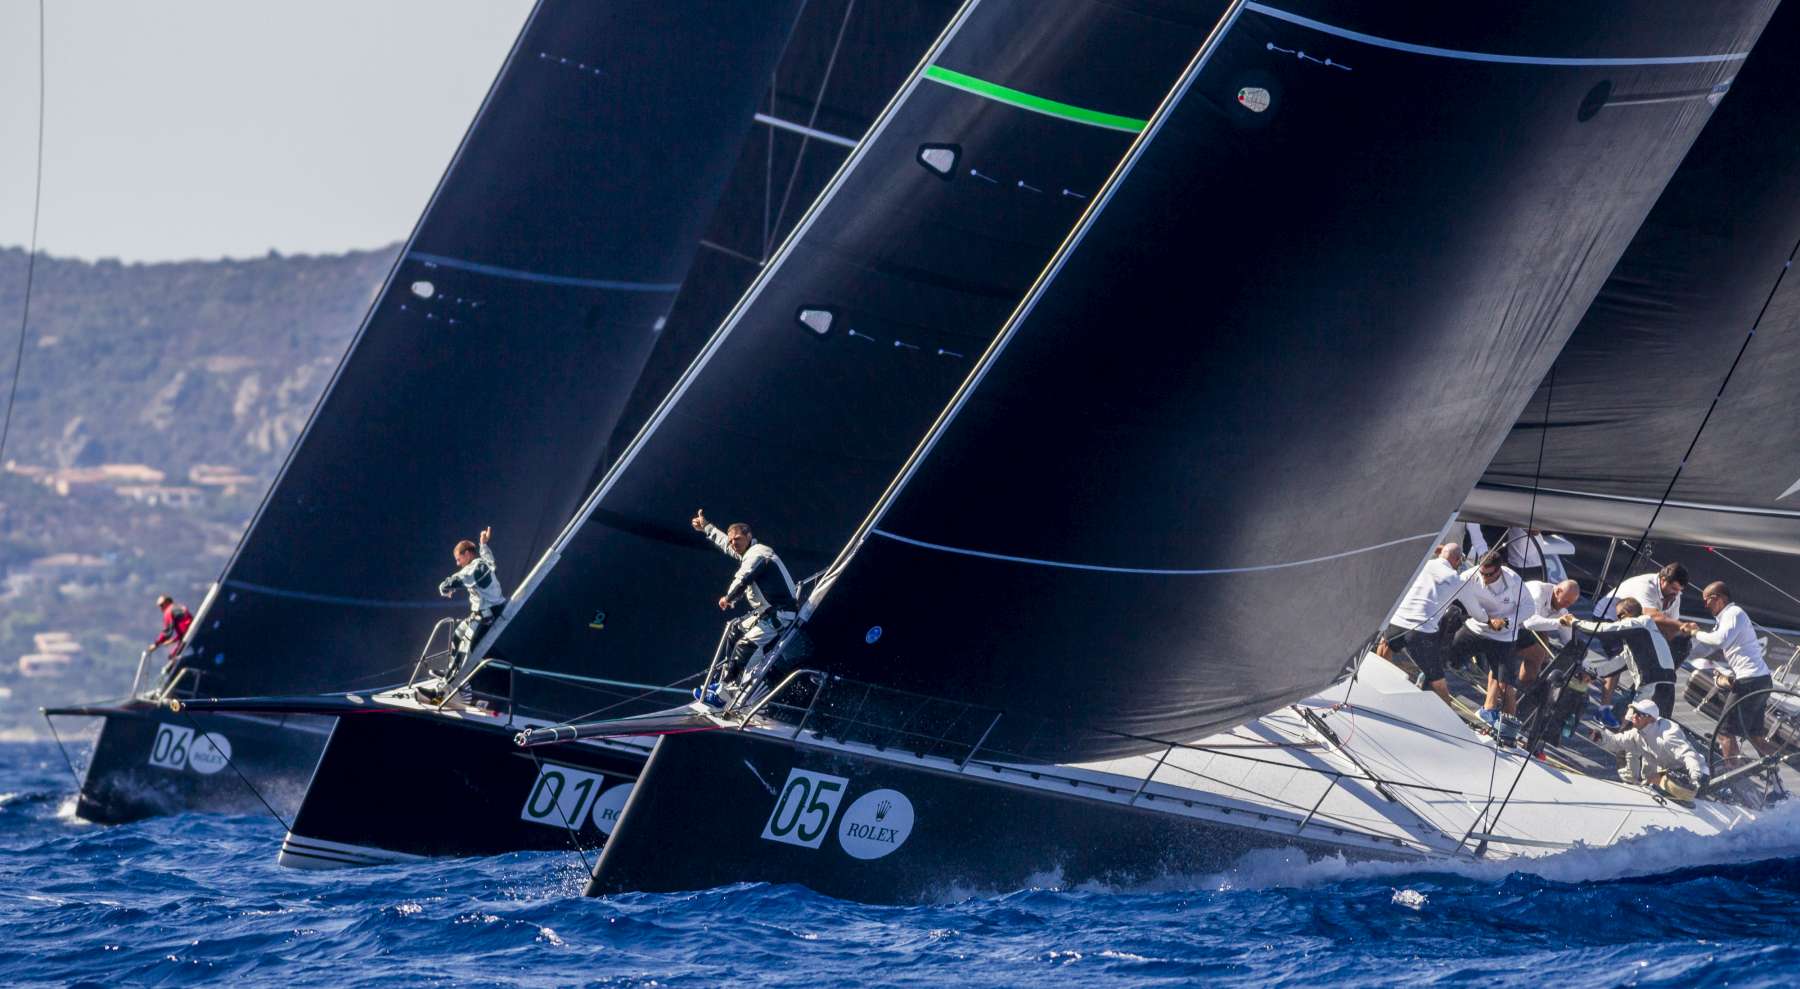 Maxi Yacht Rolex Cup Video Preview - NEWS - Yacht Club Costa Smeralda